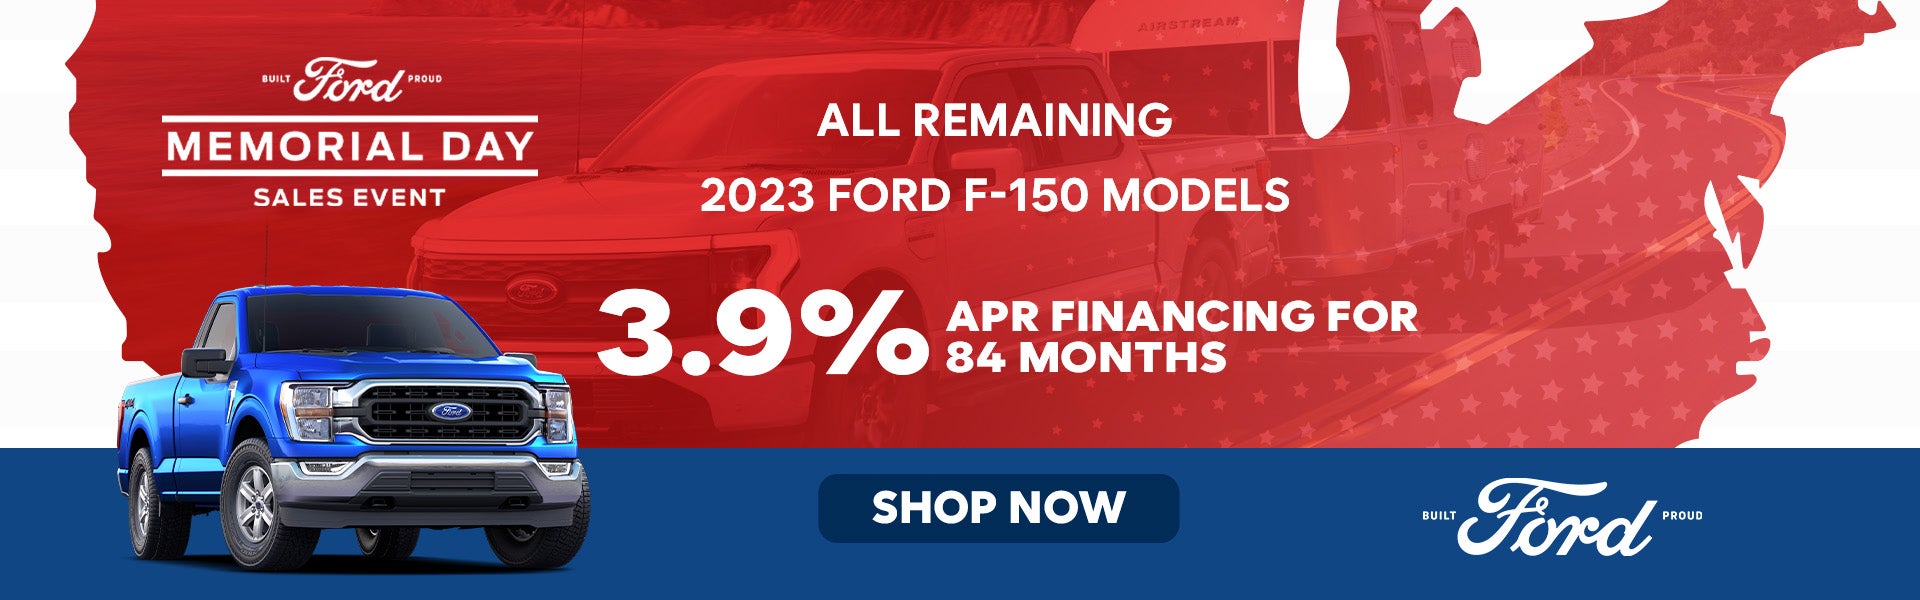 Remaining 2023 Ford F-150